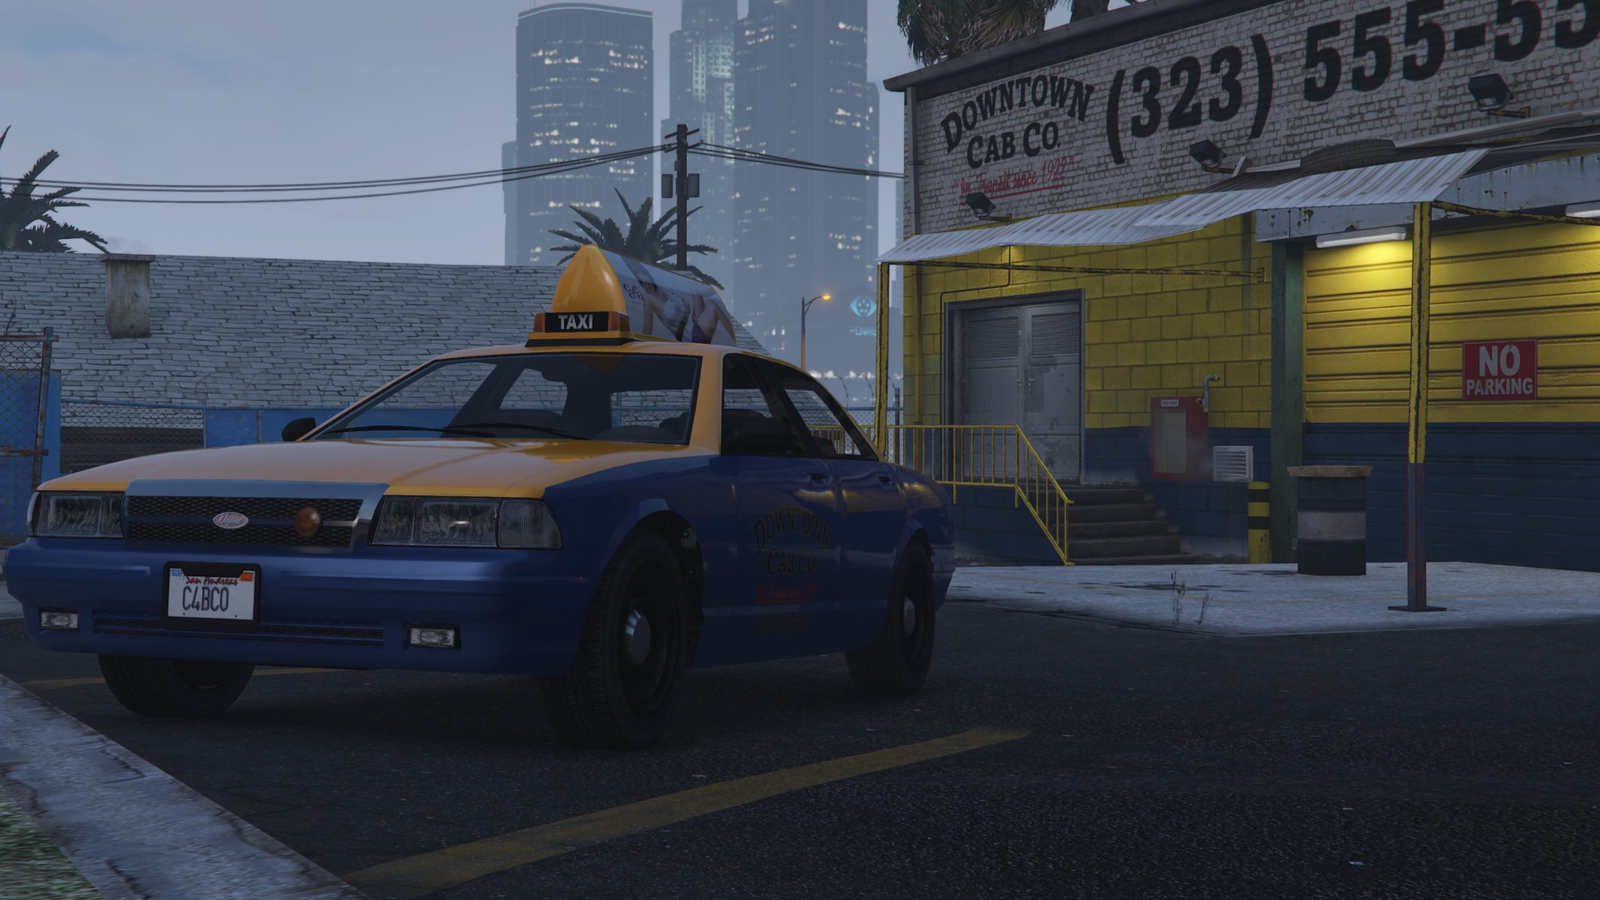 https://assetsio.reedpopcdn.com/gta-online-downtown-cab-company-building-and-taxi.jpg?width=1600&height=900&fit=crop&quality=100&format=png&enable=upscale&auto=webp